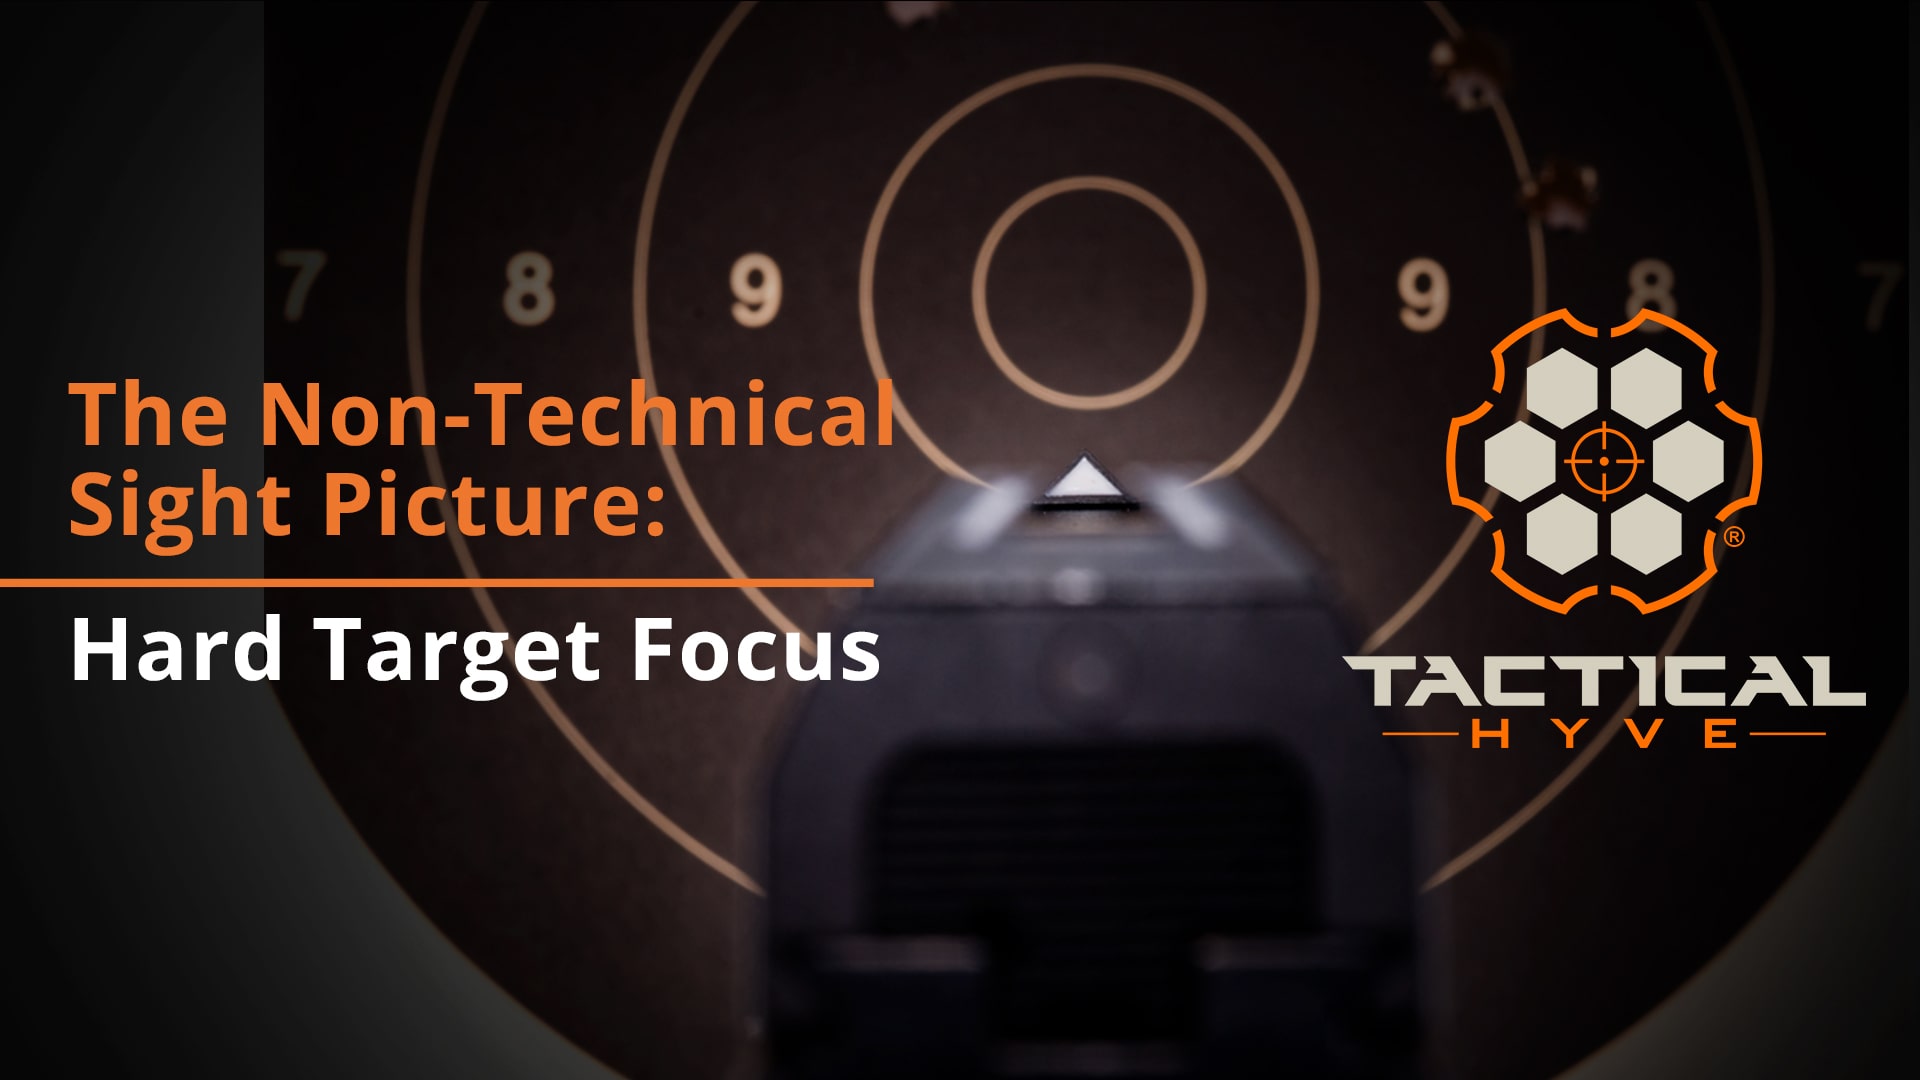 The non-technical sight picture: hard target focus.